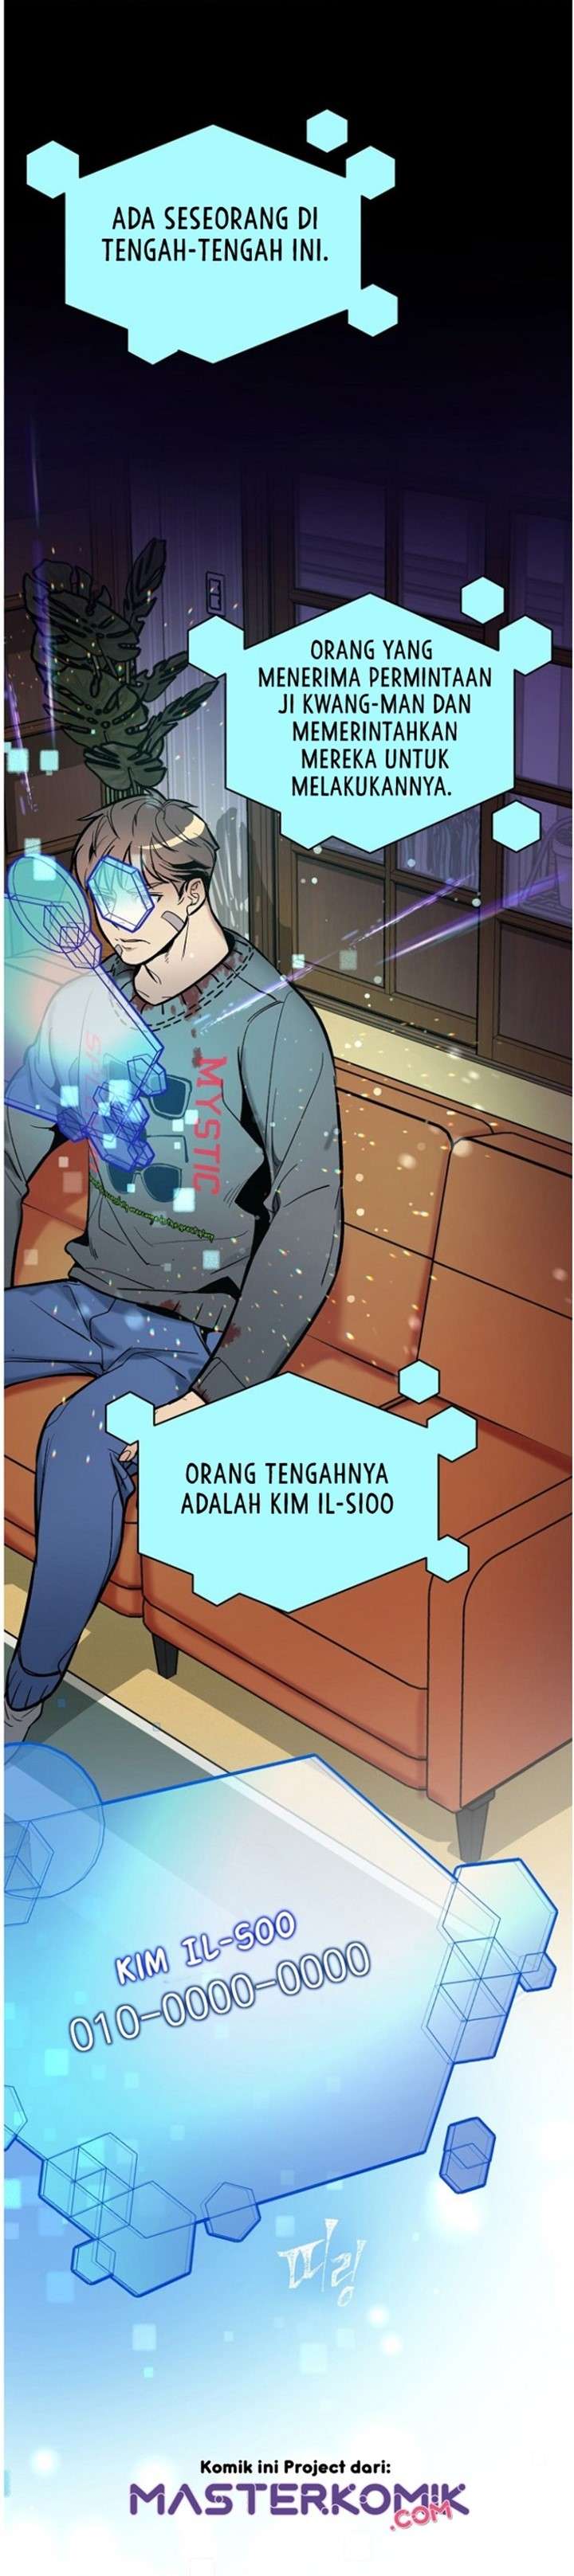 I Am Alone Genius DNA Chapter 39